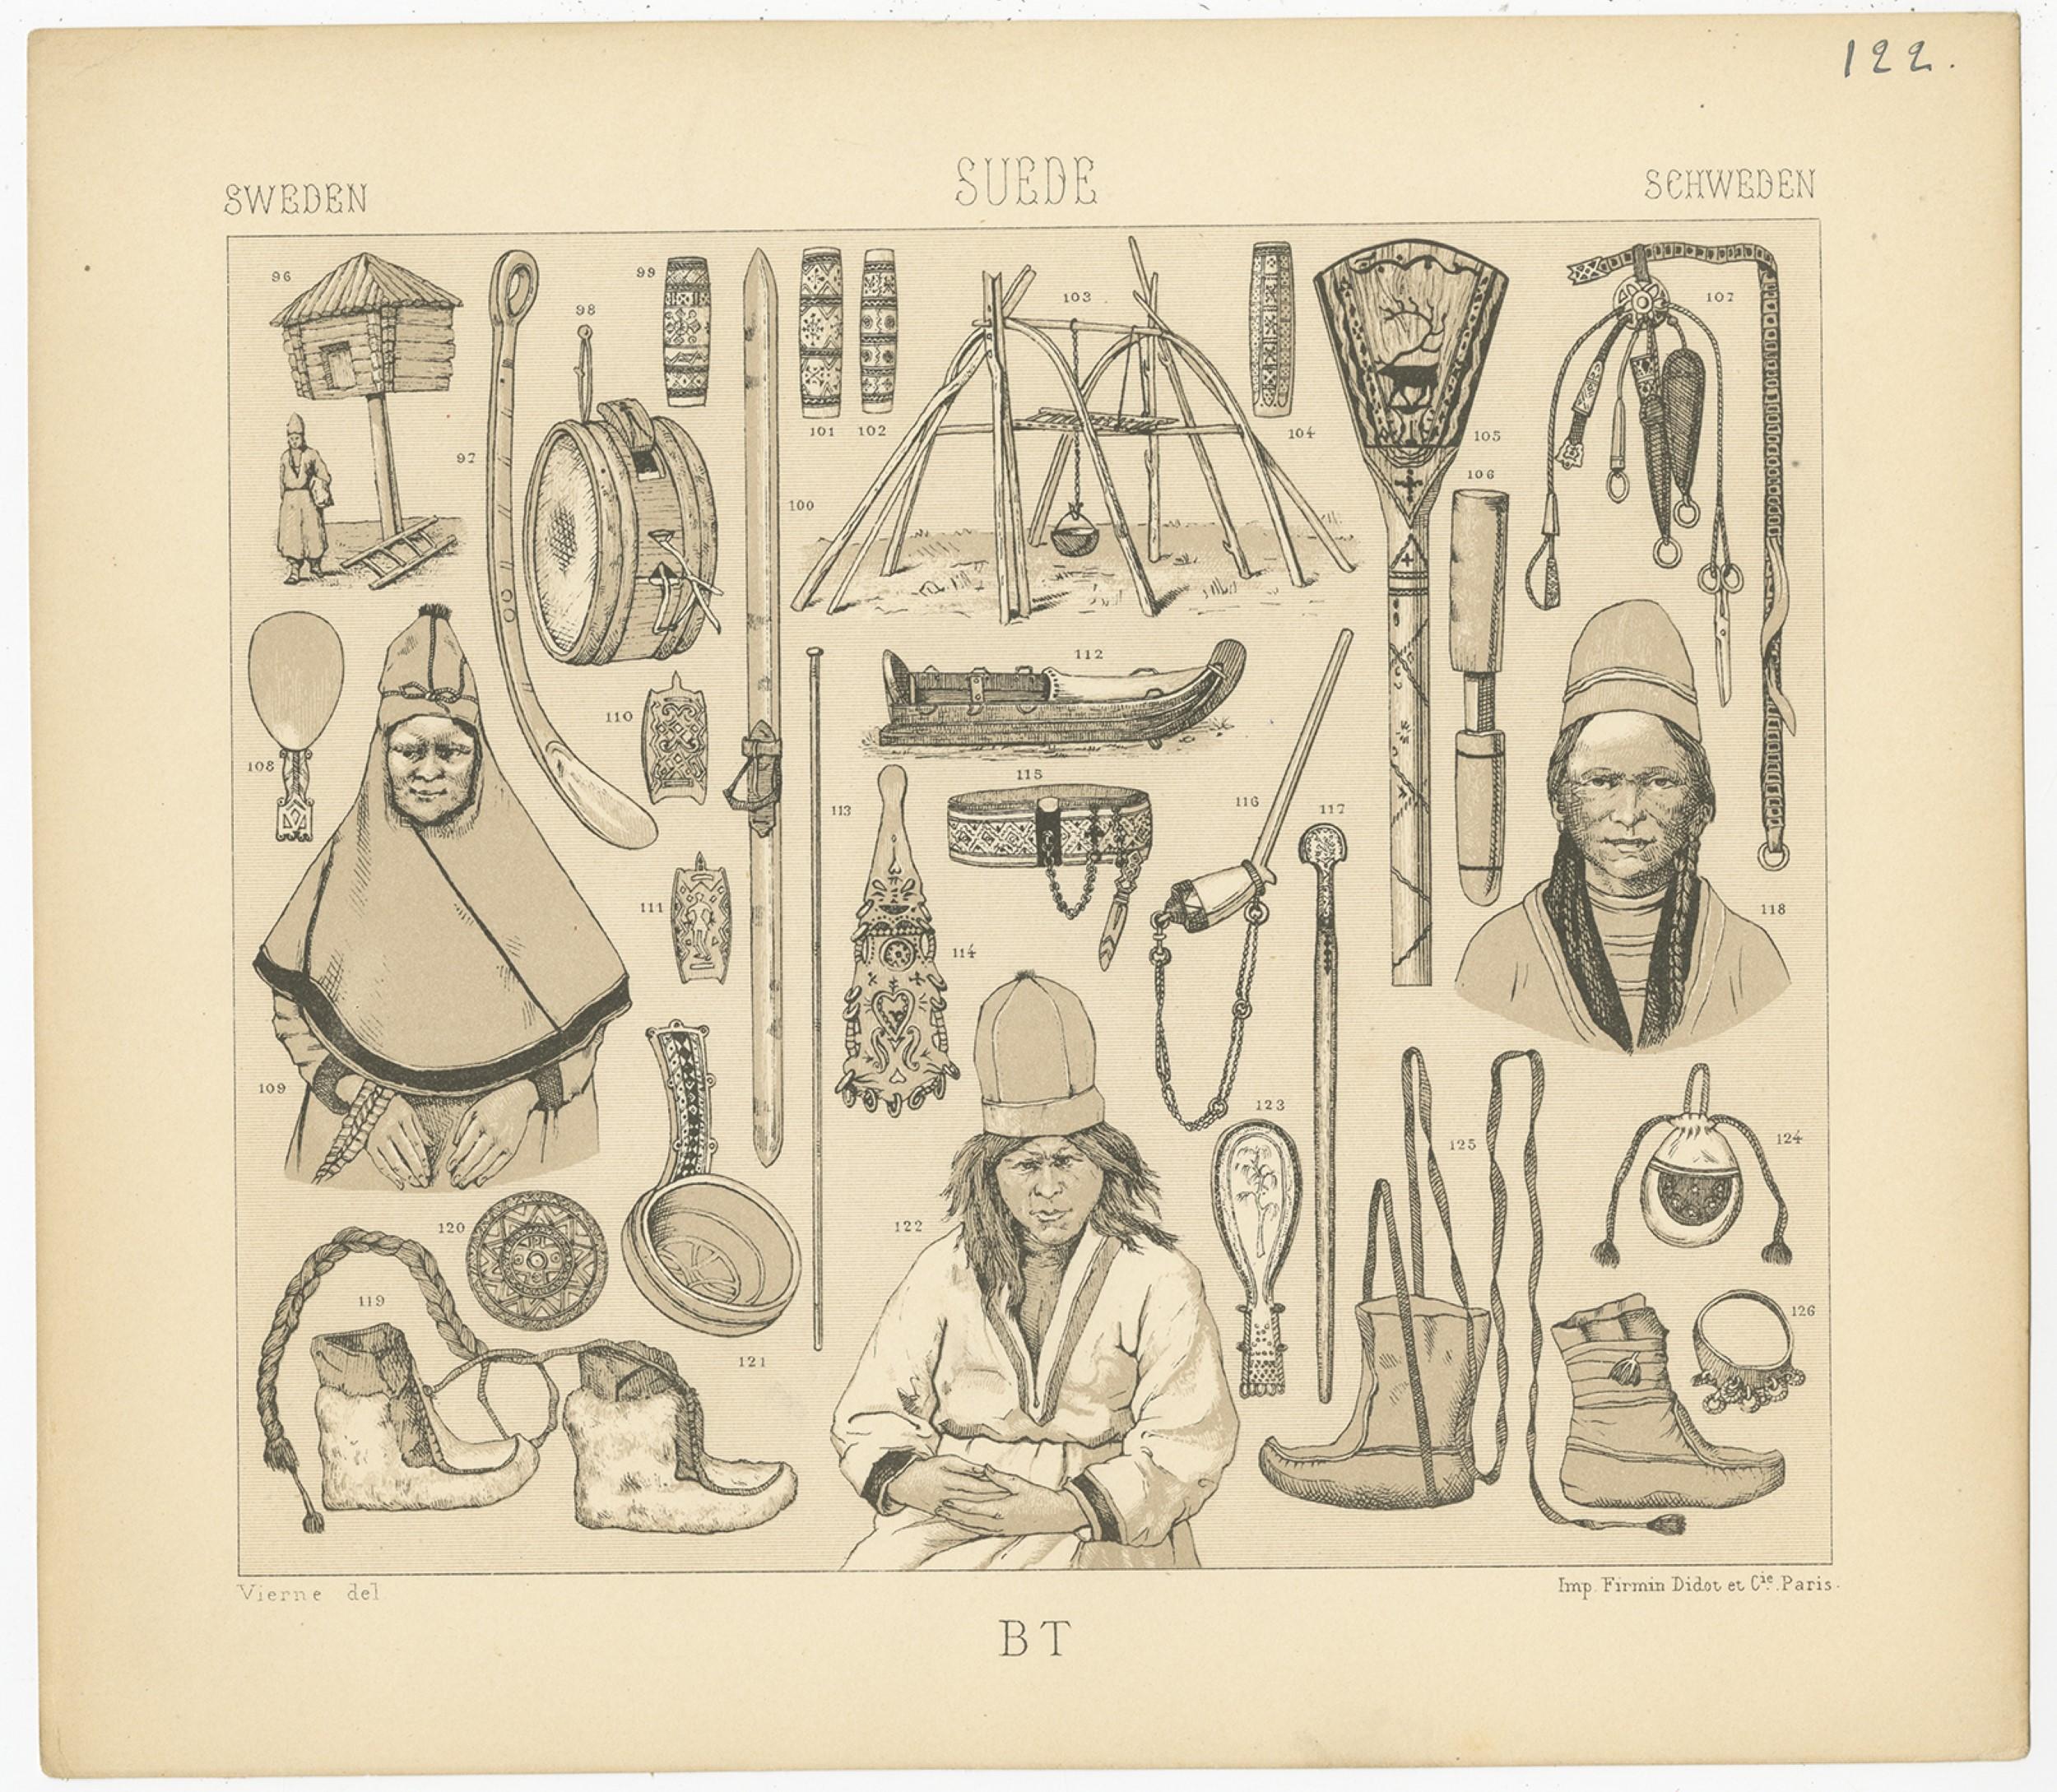 Antique print titled 'Sweden - Suede - Schweden'. Chromolithograph of Swedish Tools. This print originates from 'Le Costume Historique' by M.A. Racinet. Published, circa 1880.